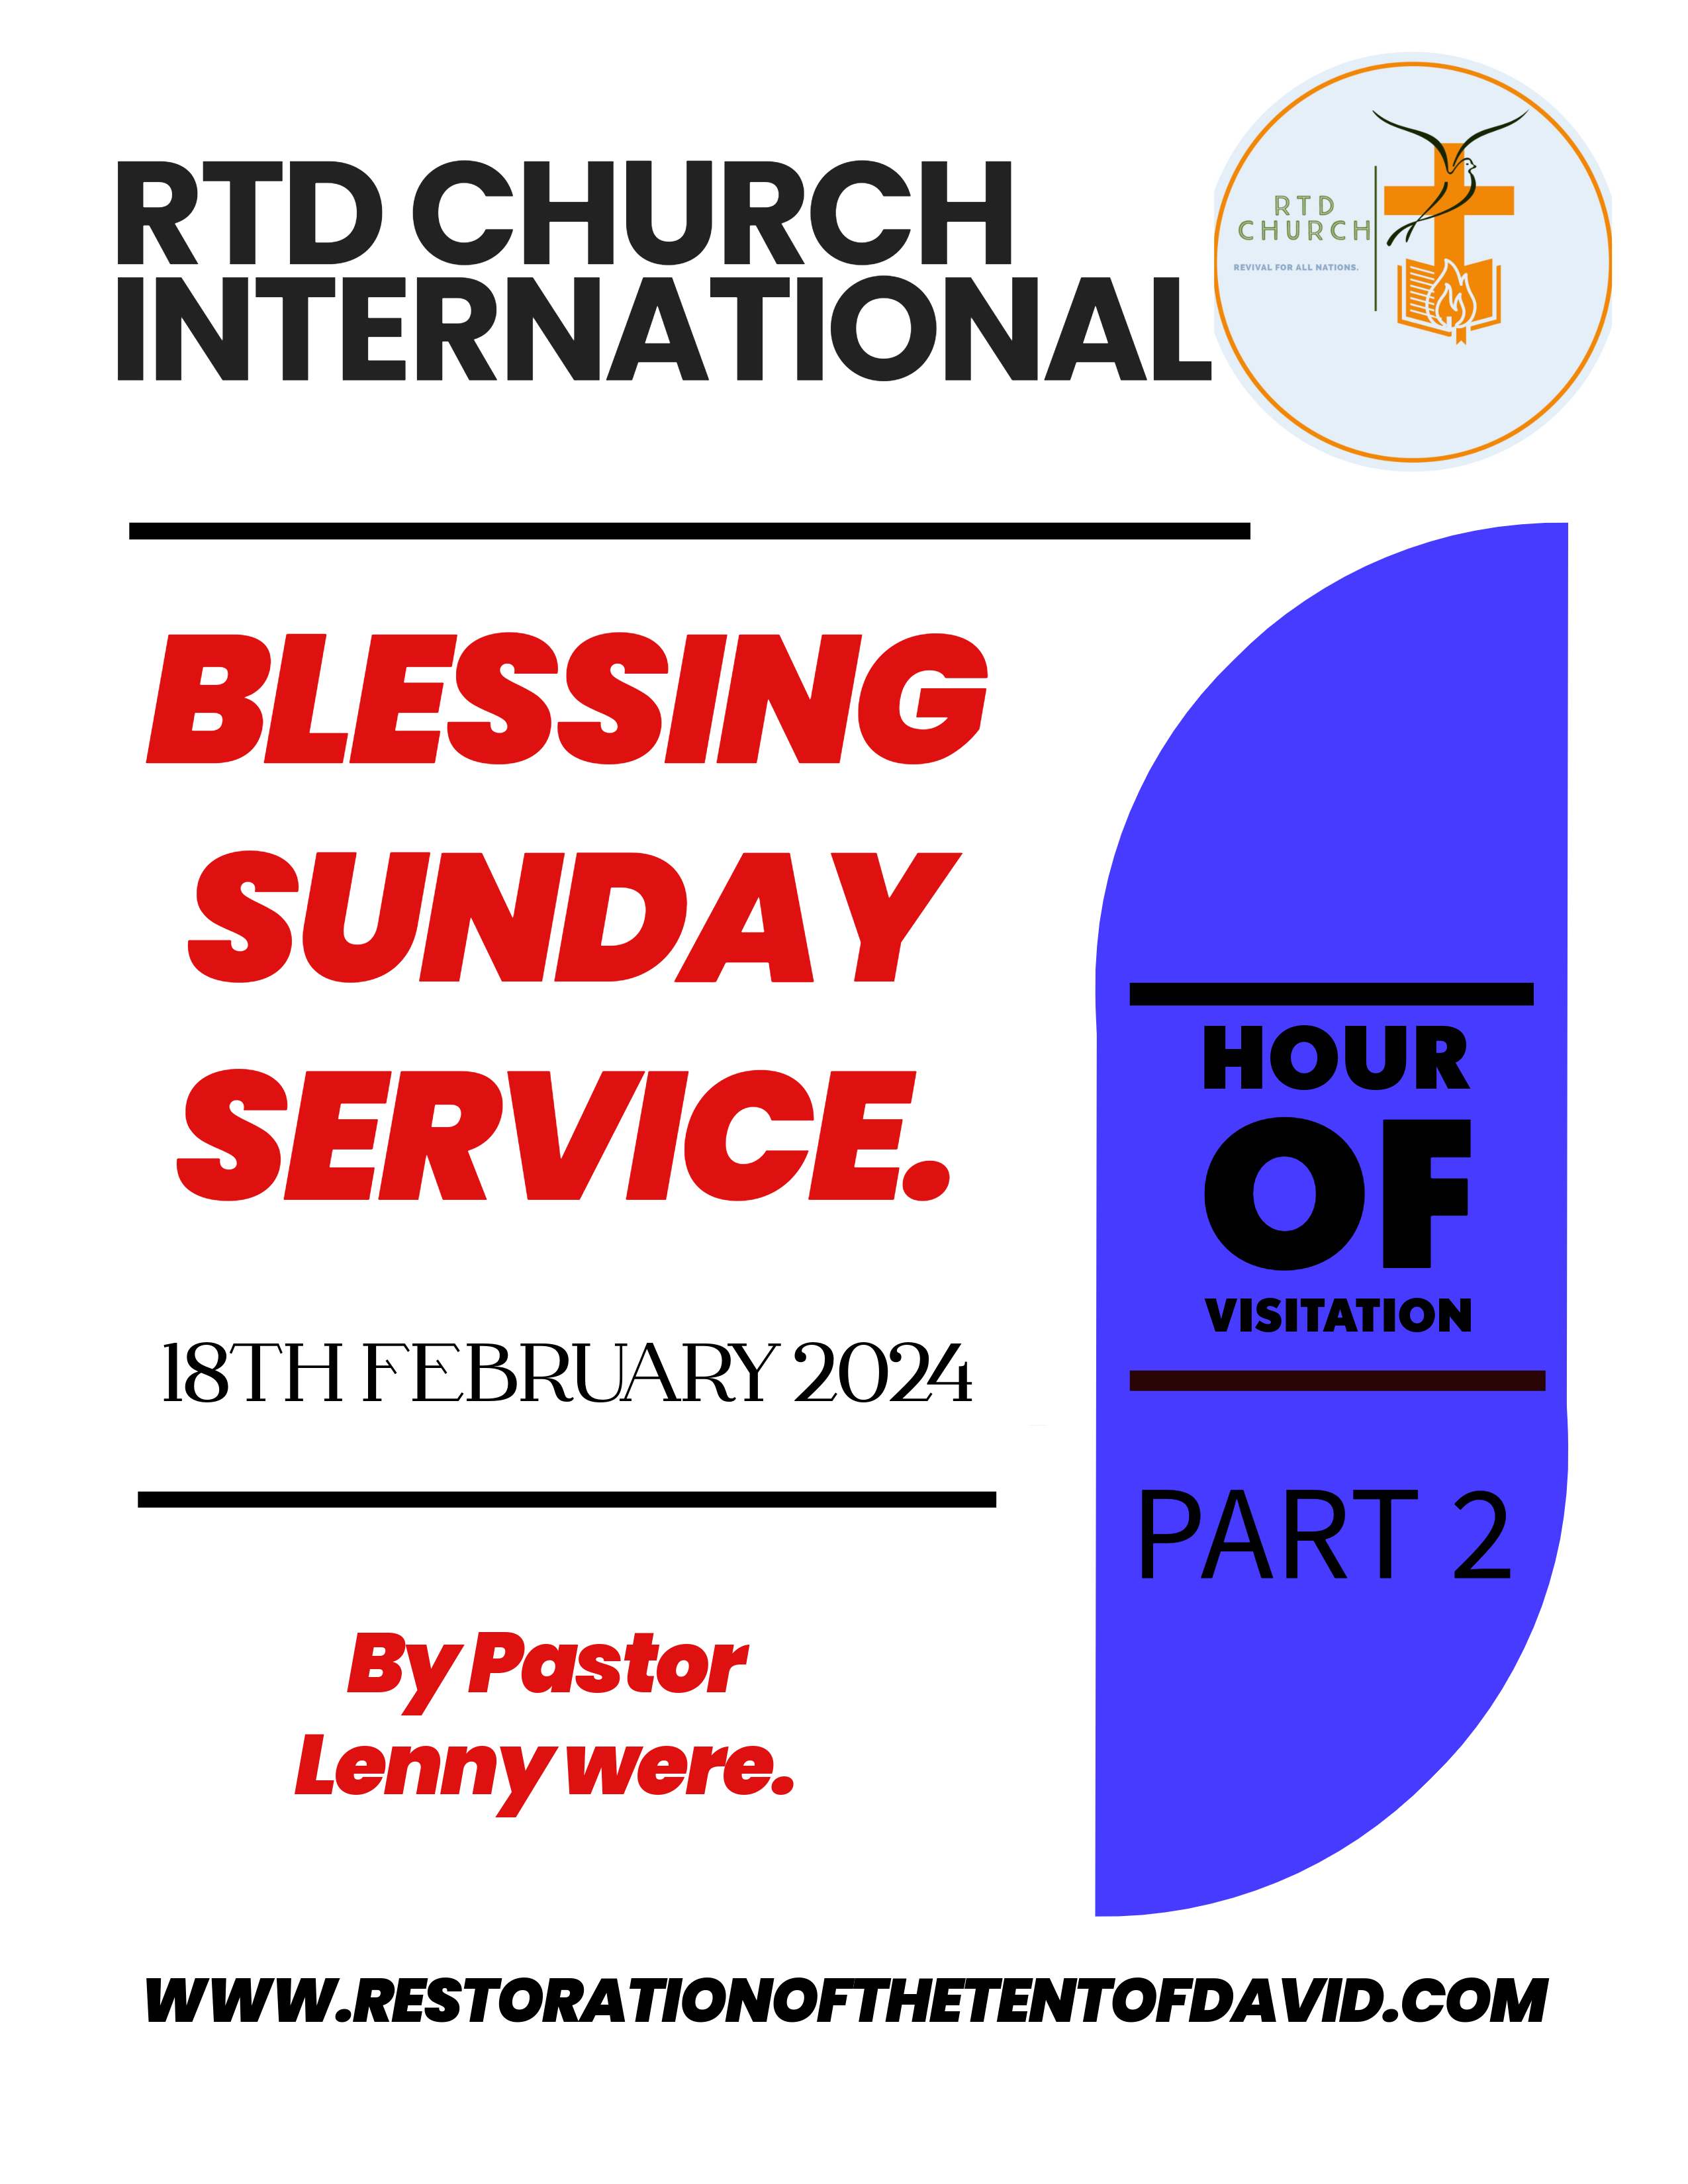 SUNDAY BLESSING SERVICE. 18TH FEBRUARY 2024. PART 2.